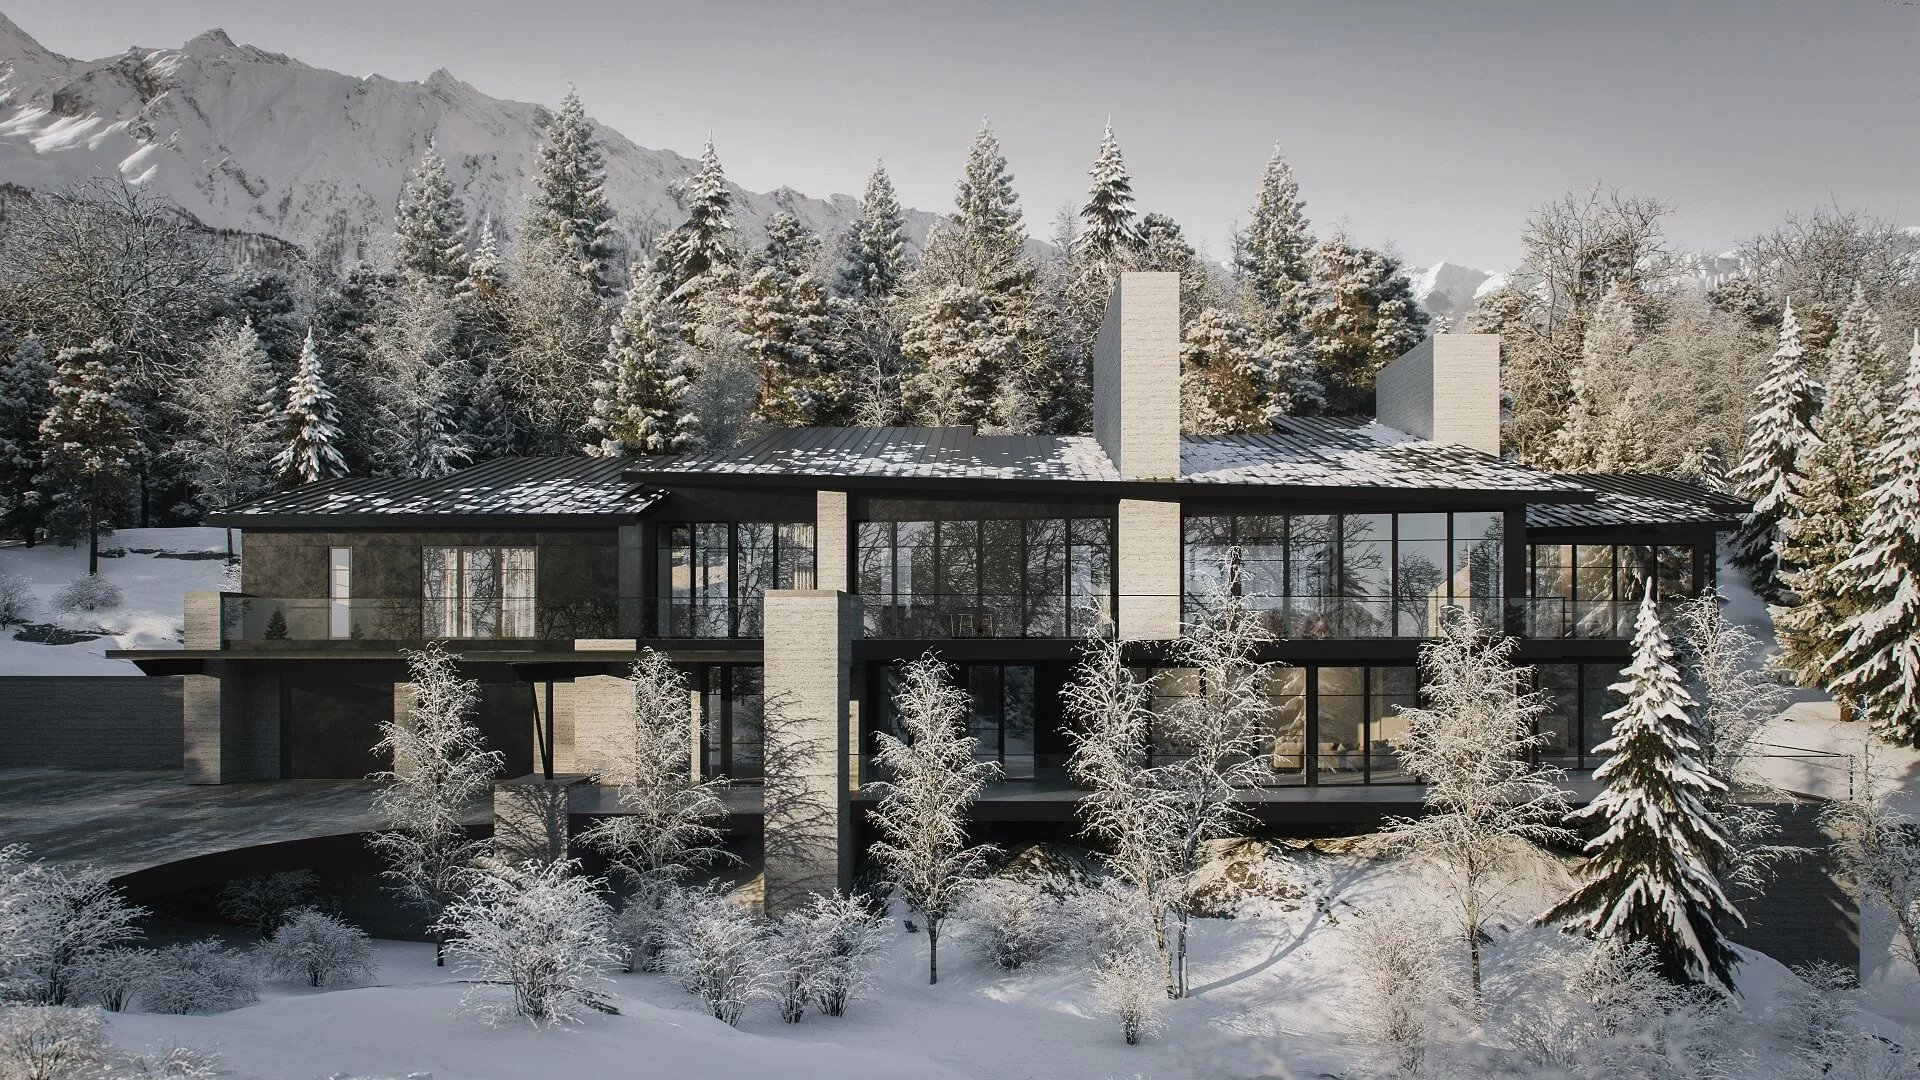 3D Architectural Rendering of a Mountain Residence in Colorado